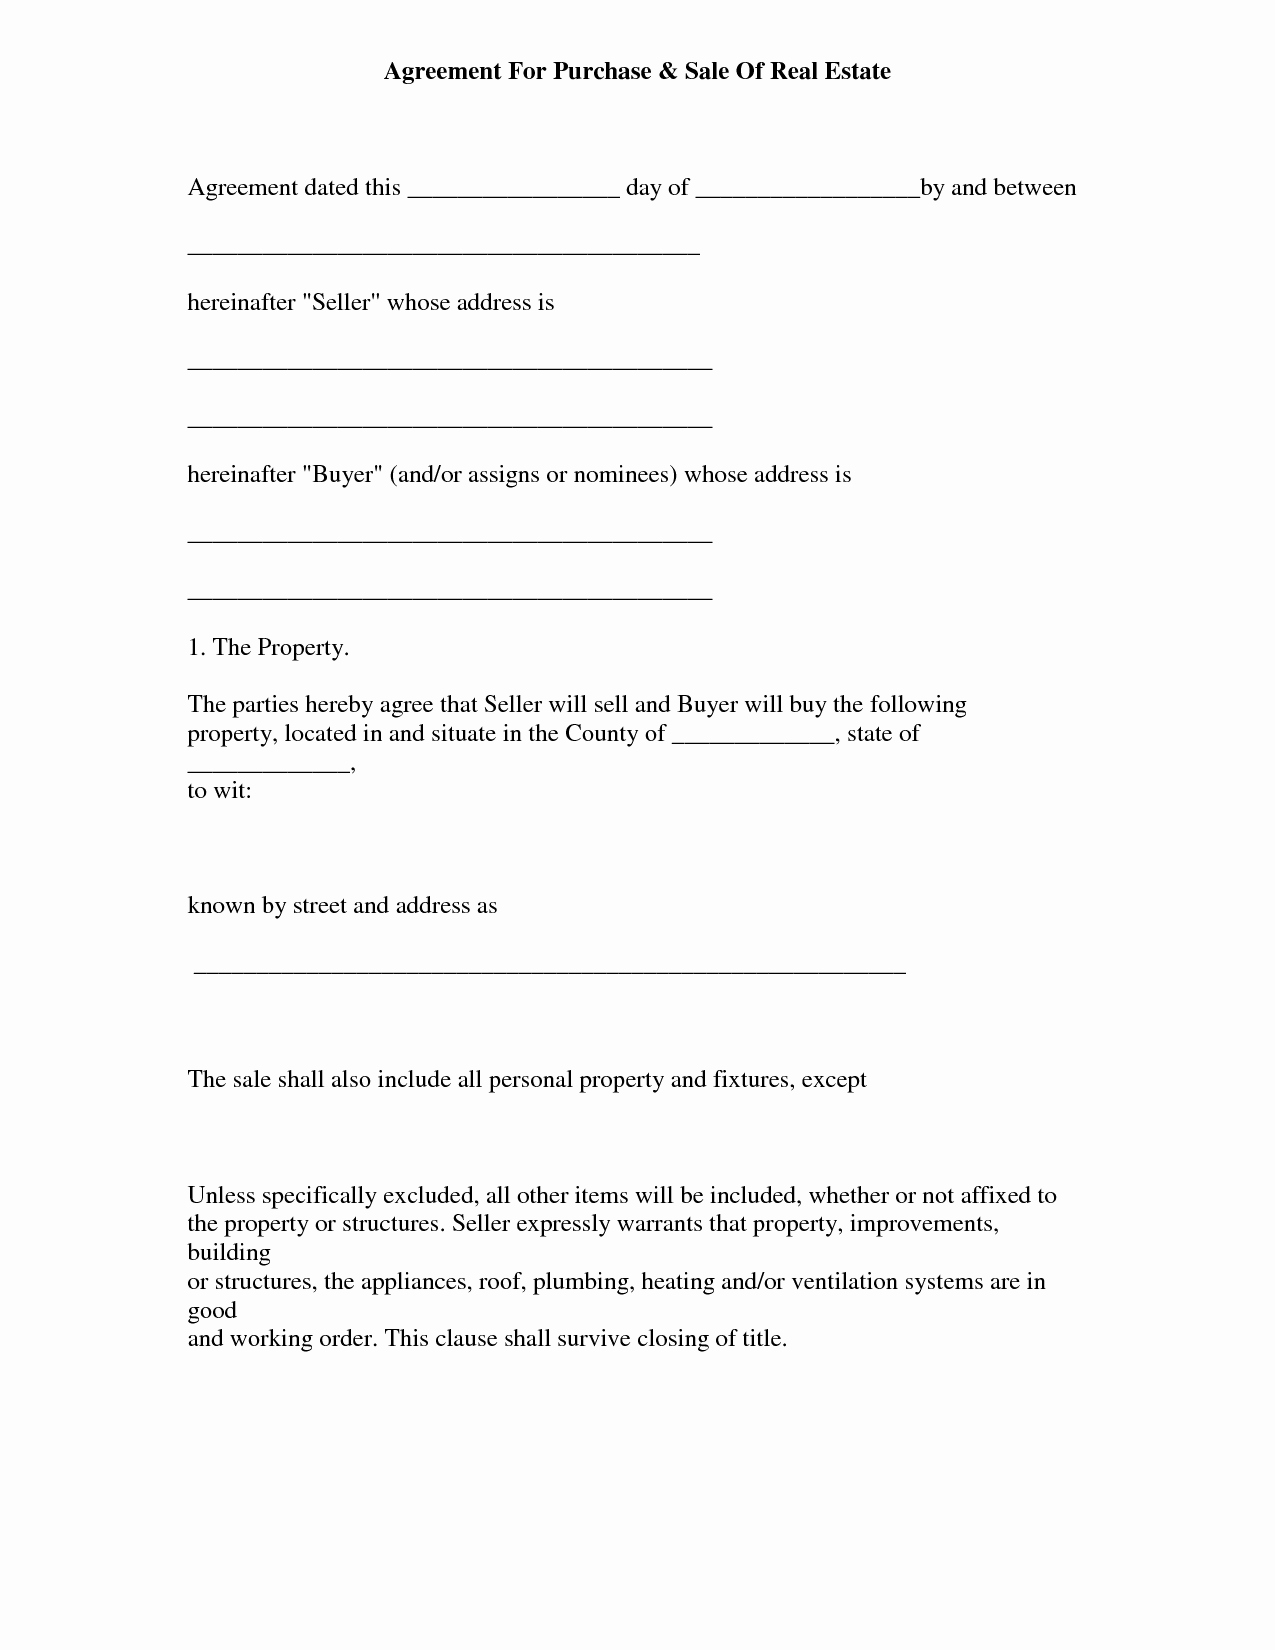 Co-ownership Agreement Real Estate Template Lovely Simple Land Purchase Agreement form